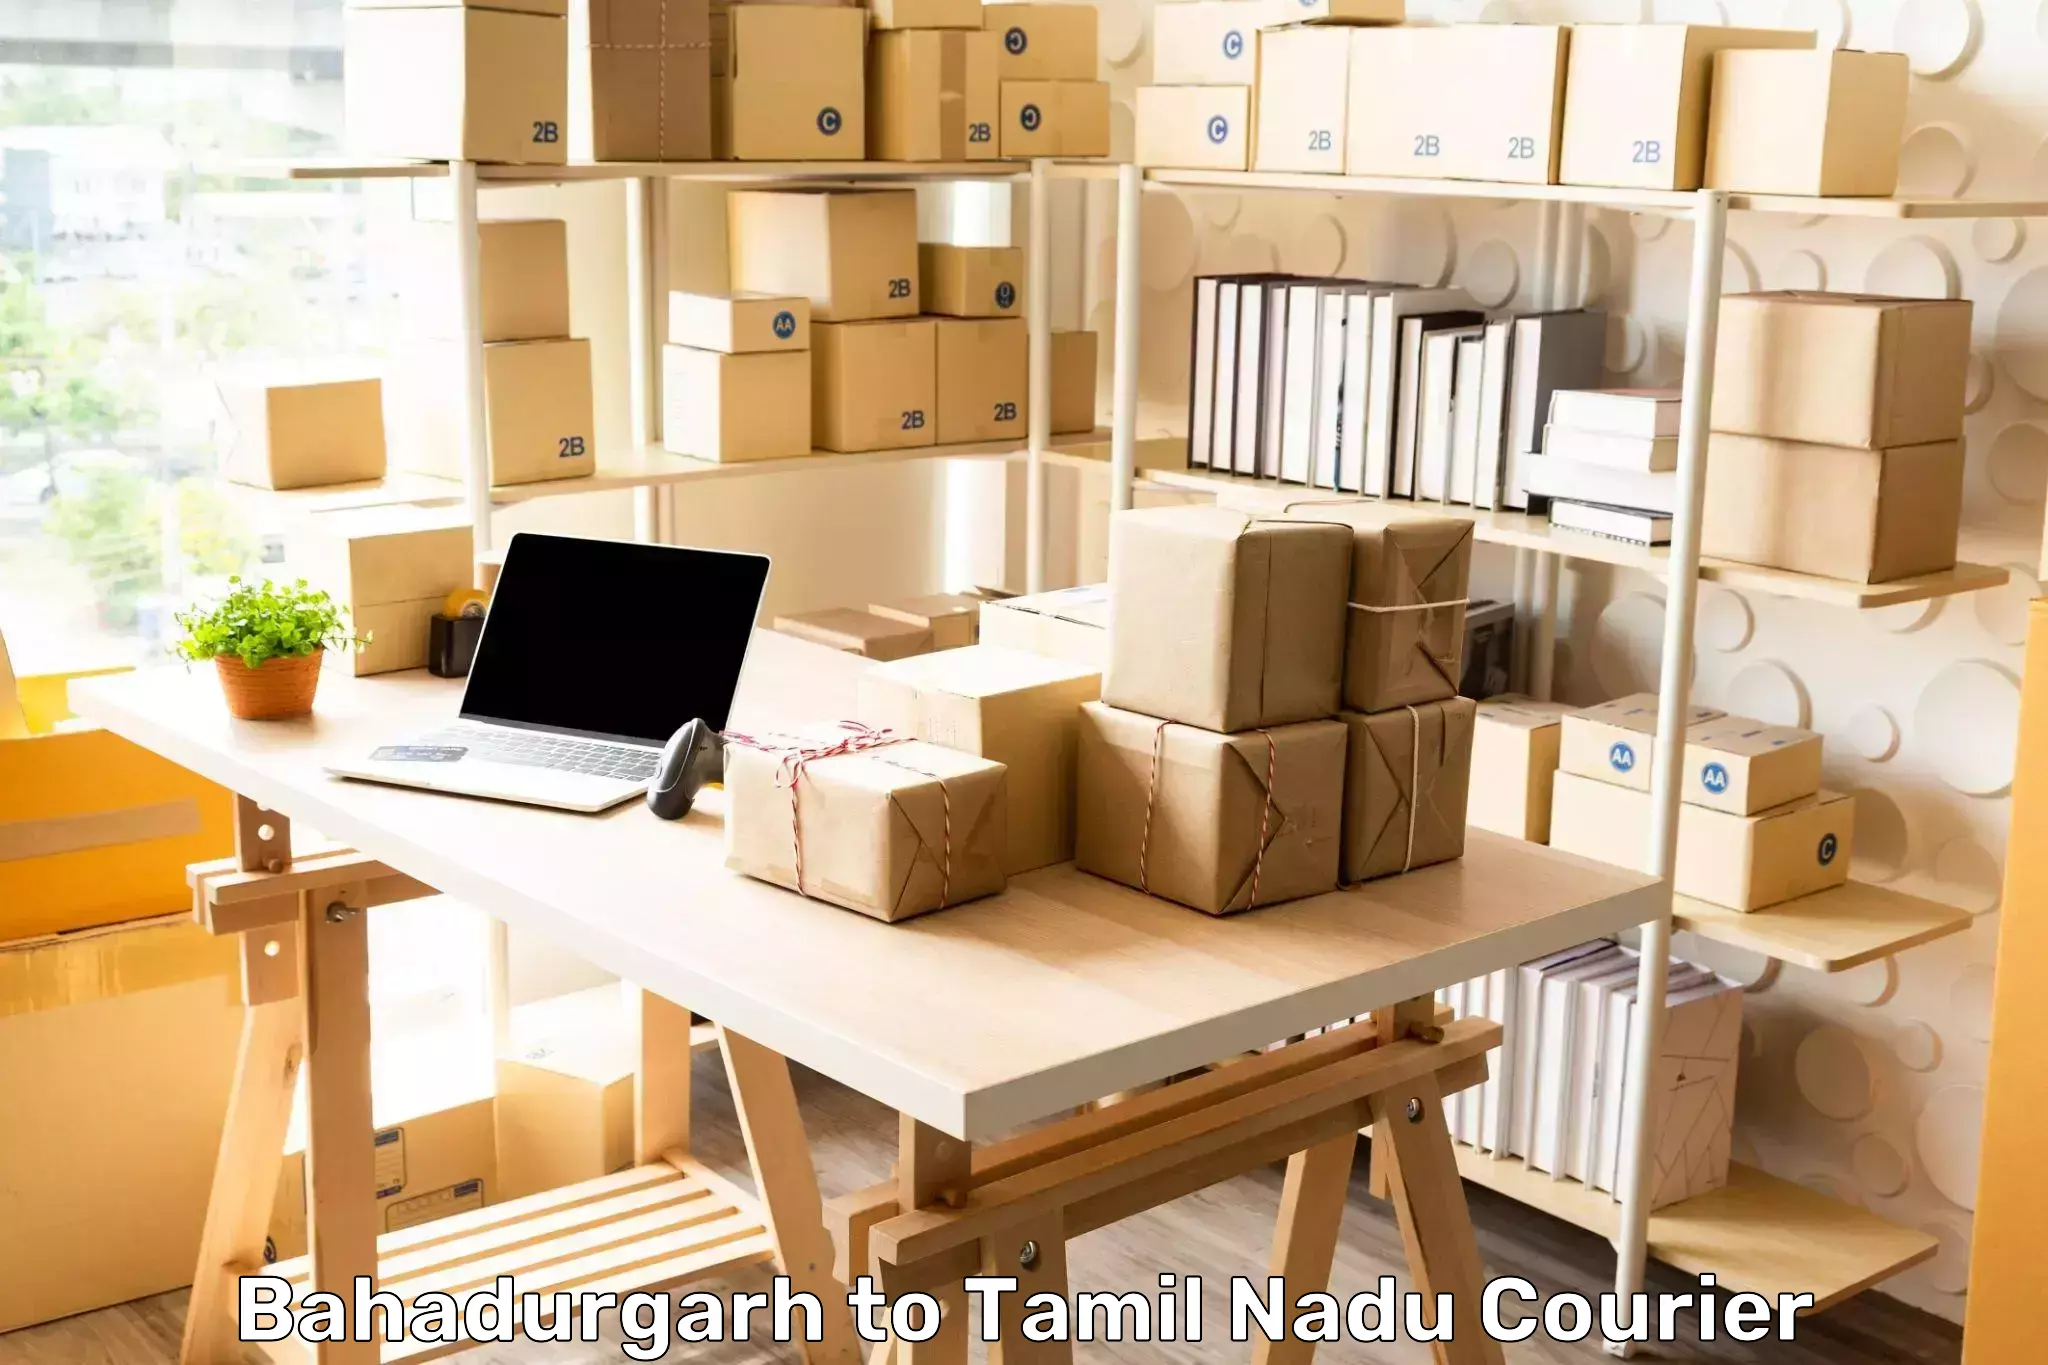 Customer-oriented courier services Bahadurgarh to Vellore